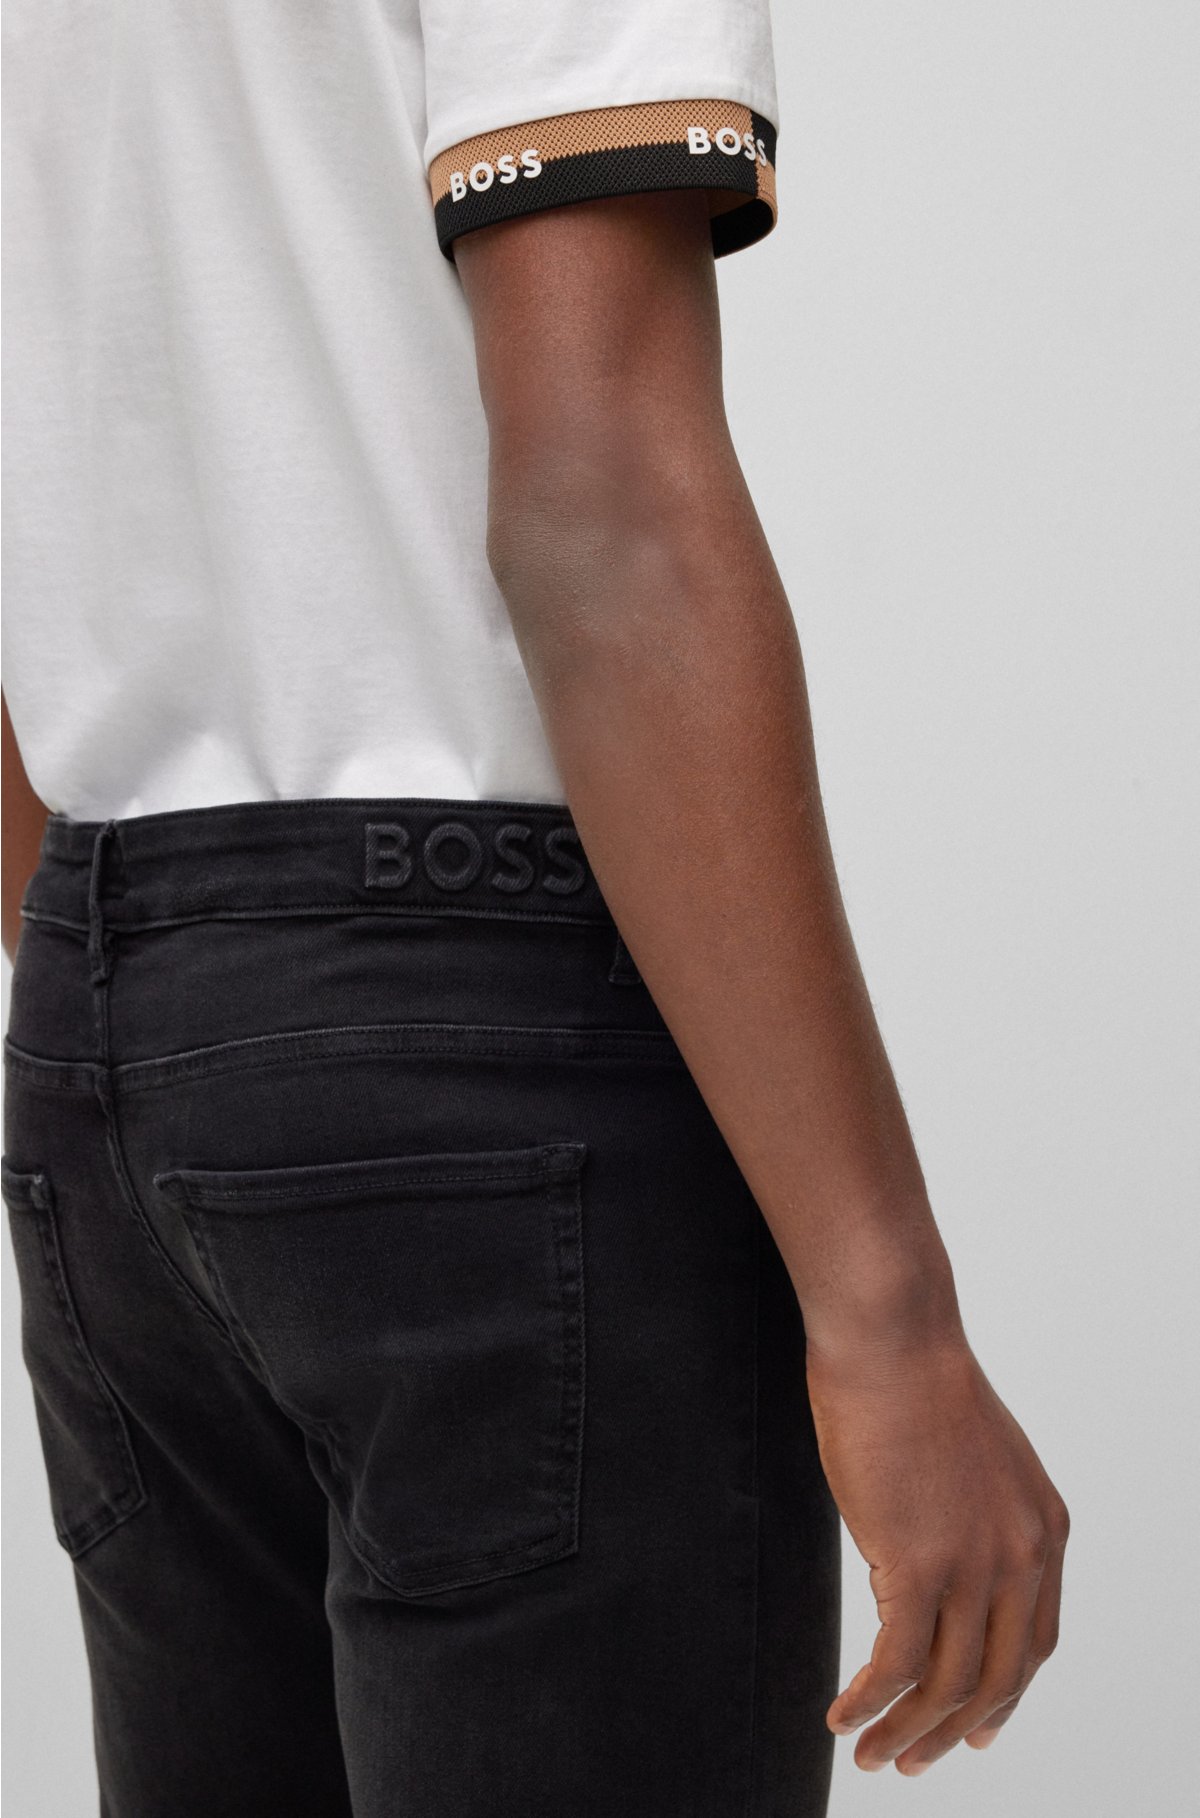 Boss Relaxed-fit Jeans in pure-cotton Denim, Men, Size 36/32, Black